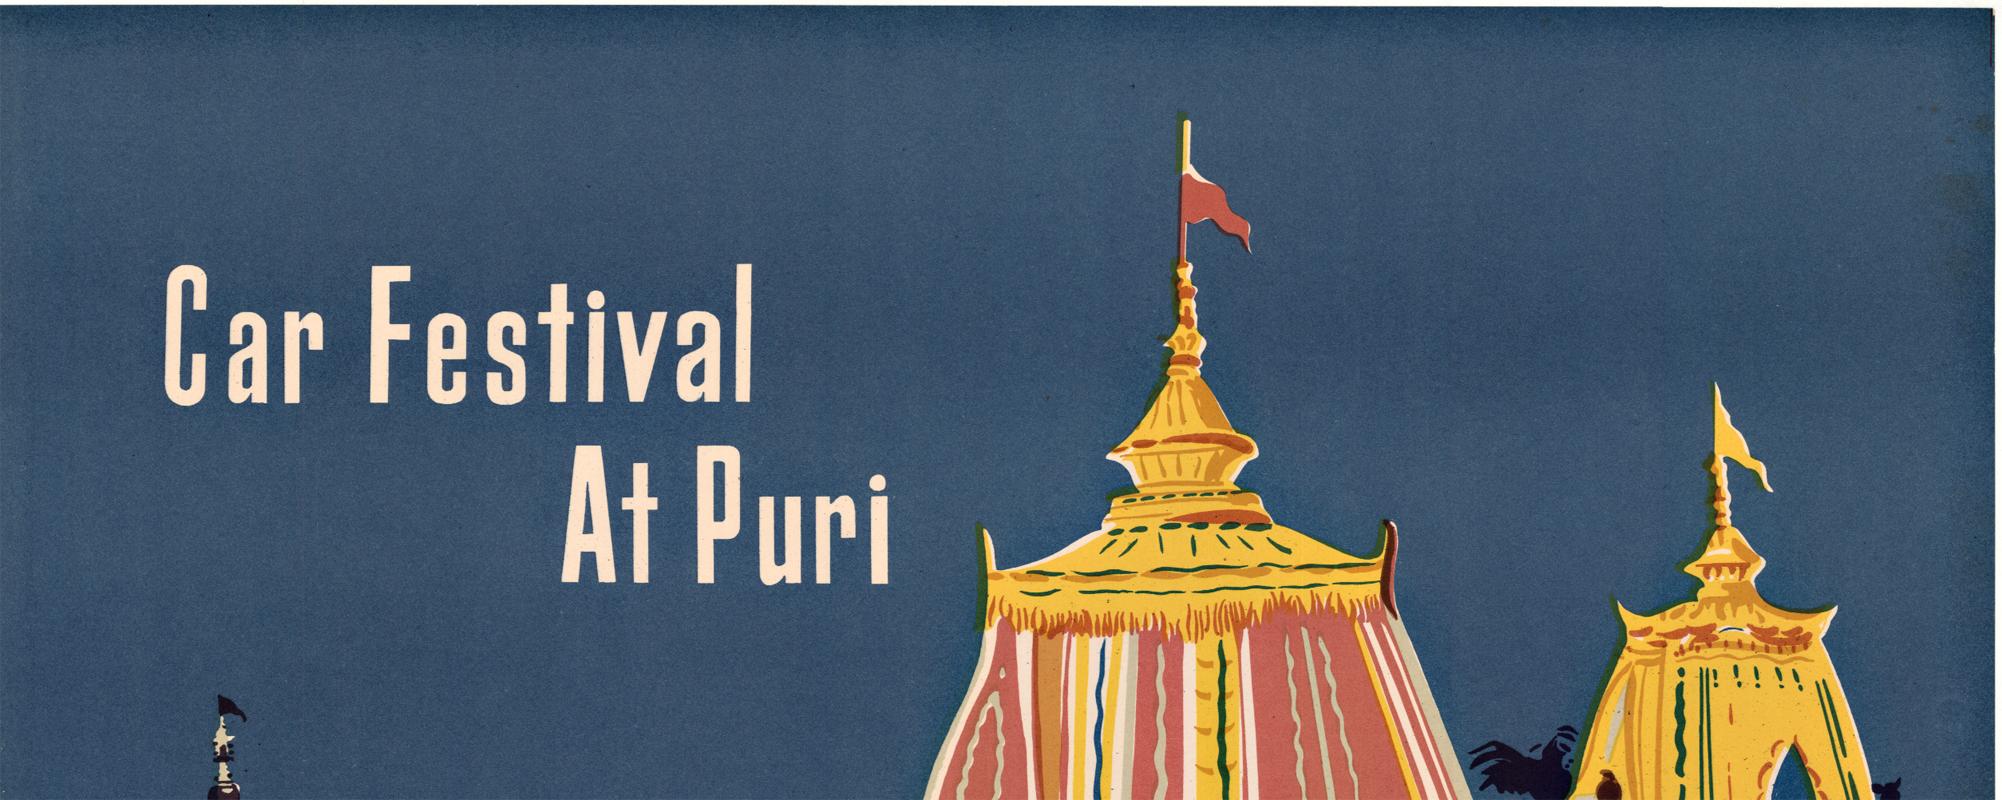 Car Festival at Puri India original vintagea travel poster - Print by Unknown